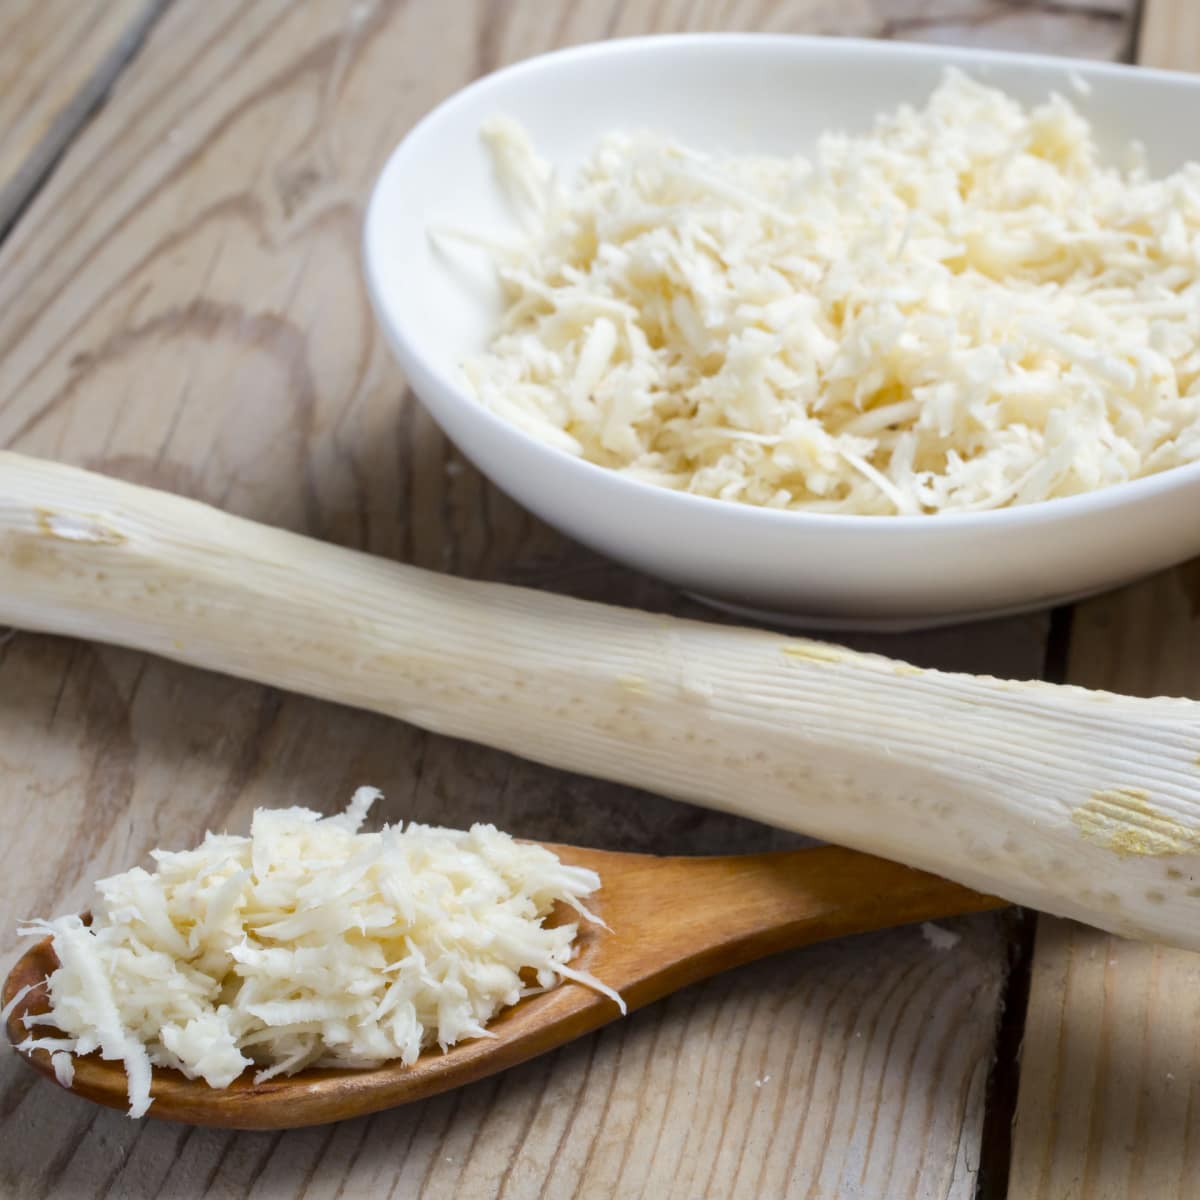 Grated Horseradish in a Bowl and Wooden Spoon